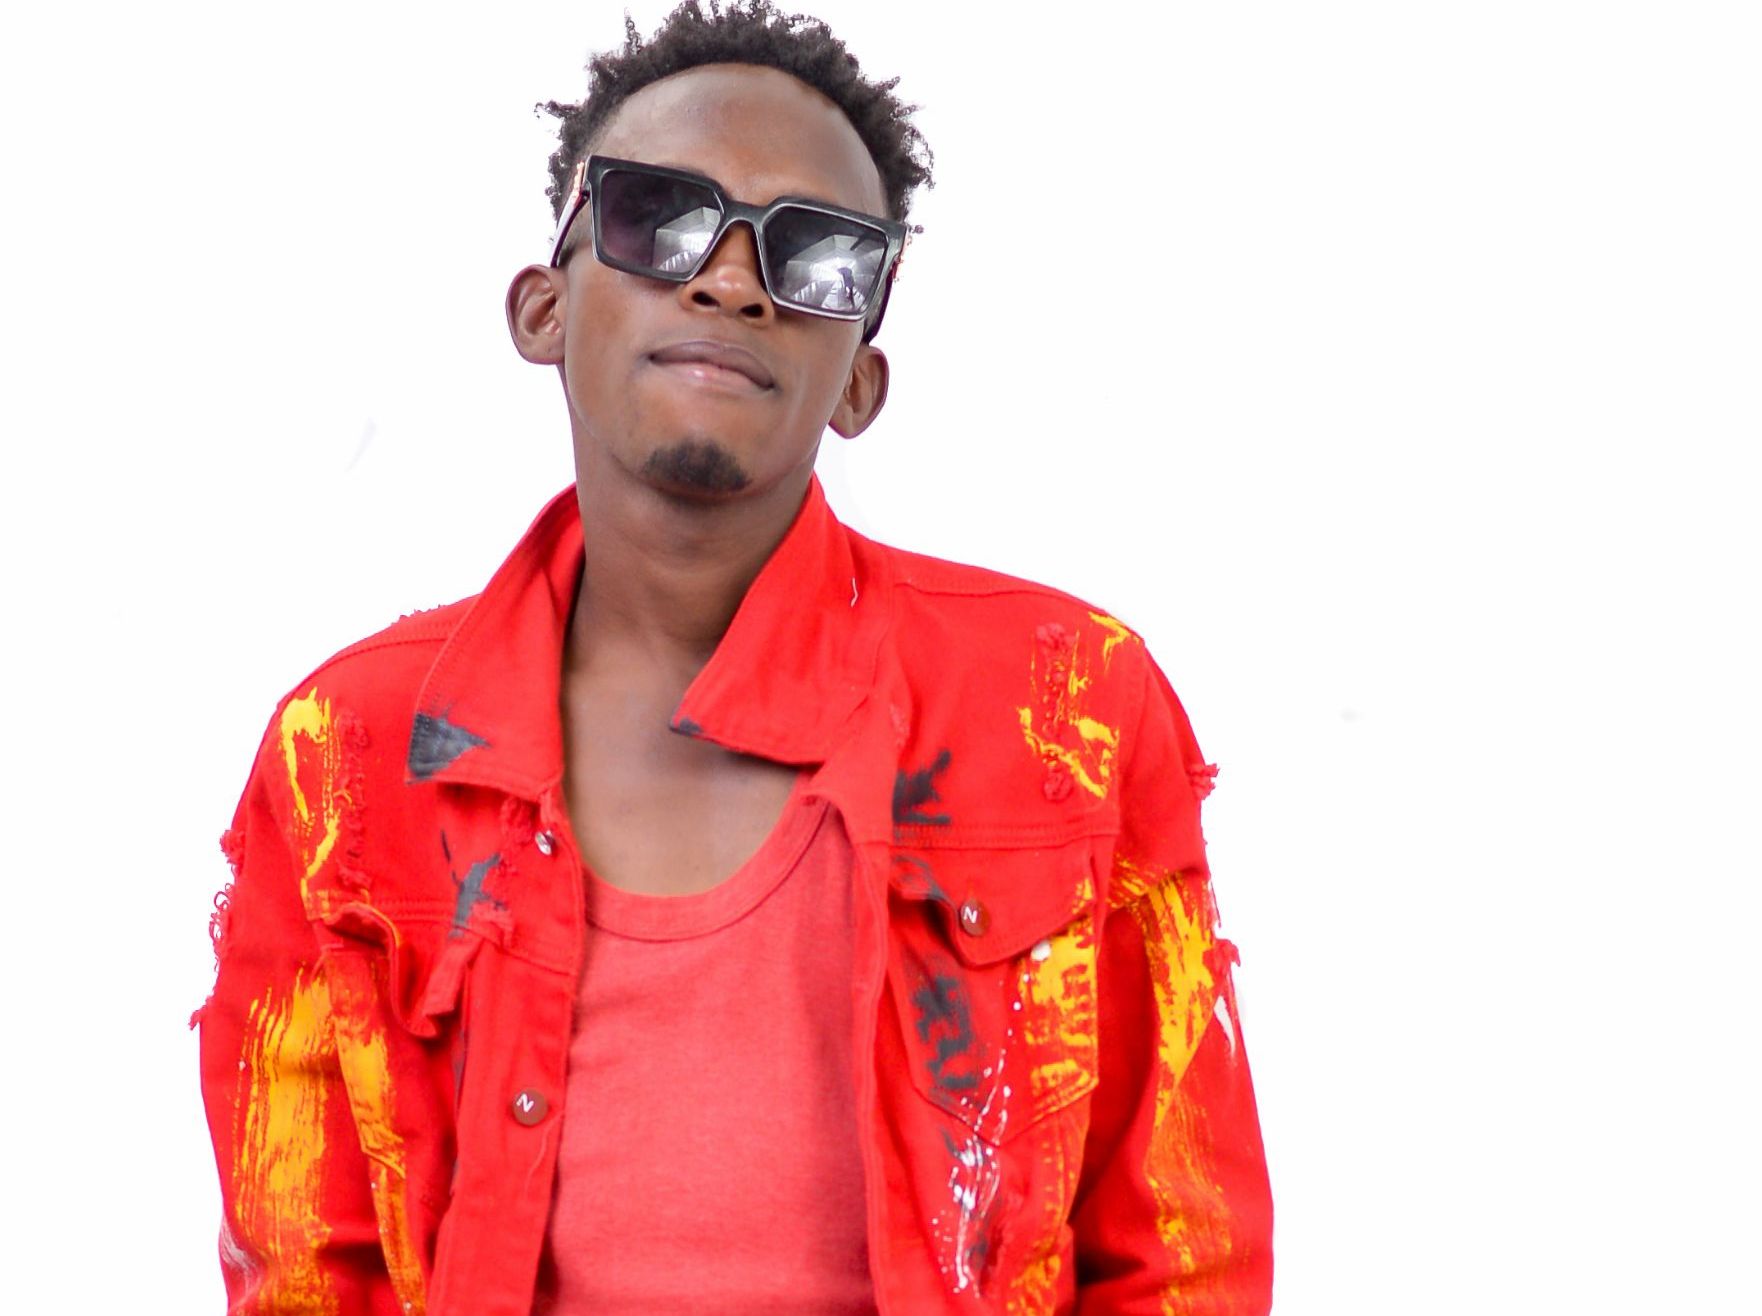 Croxxy Tee urges senior musicians’, promoters’ support for upcoming artistes